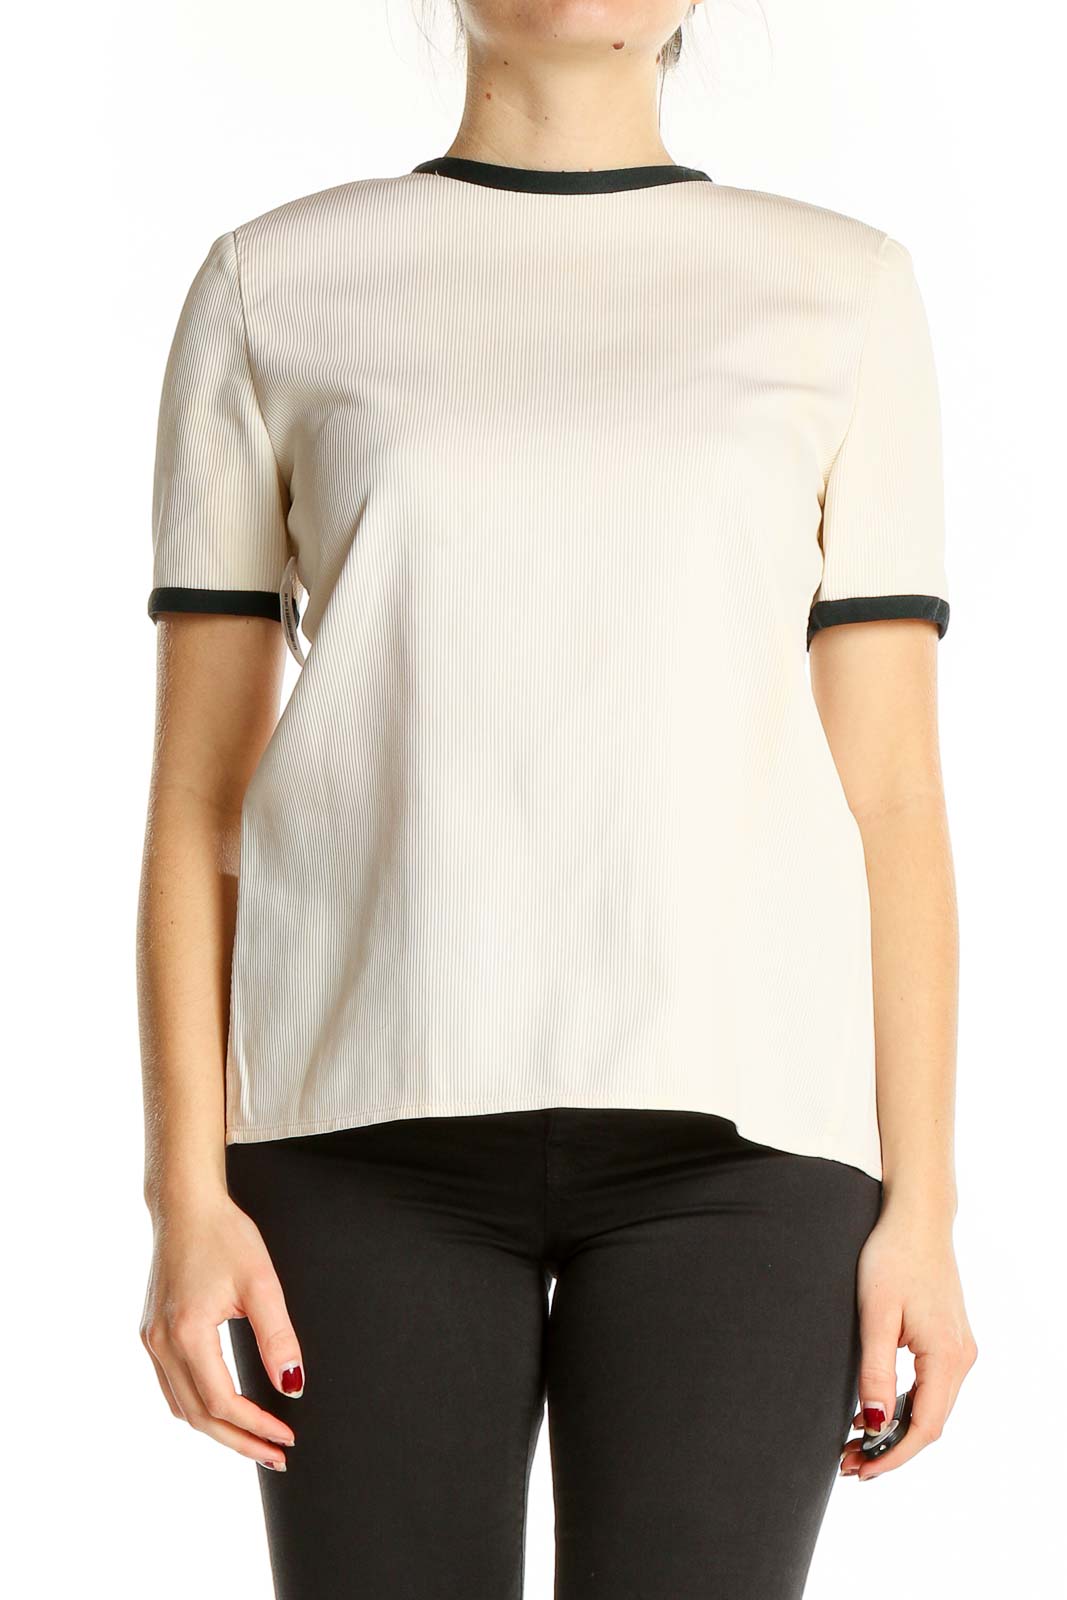 White Black Shorts Sleeve Ribbed Vintage Top Front